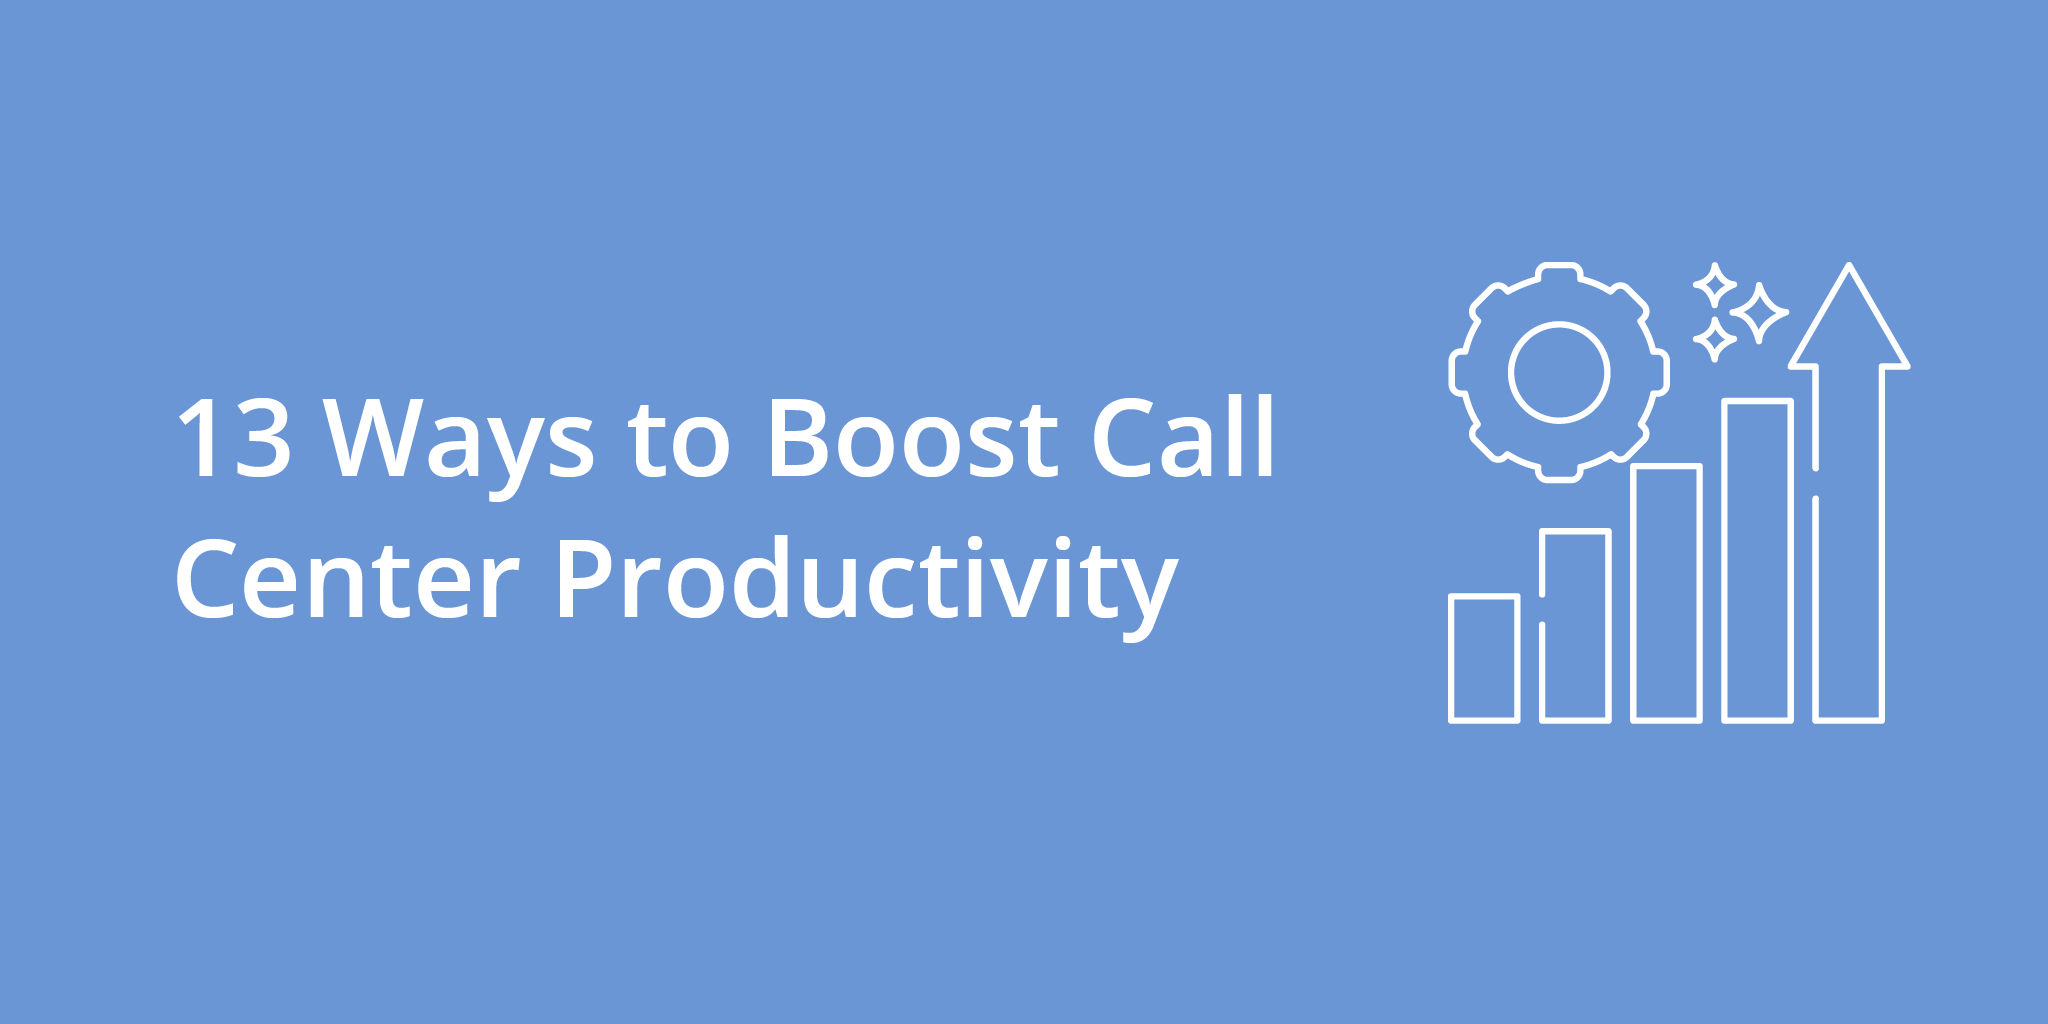 13 Ways to Boost Call Center Productivity | Telephones for business